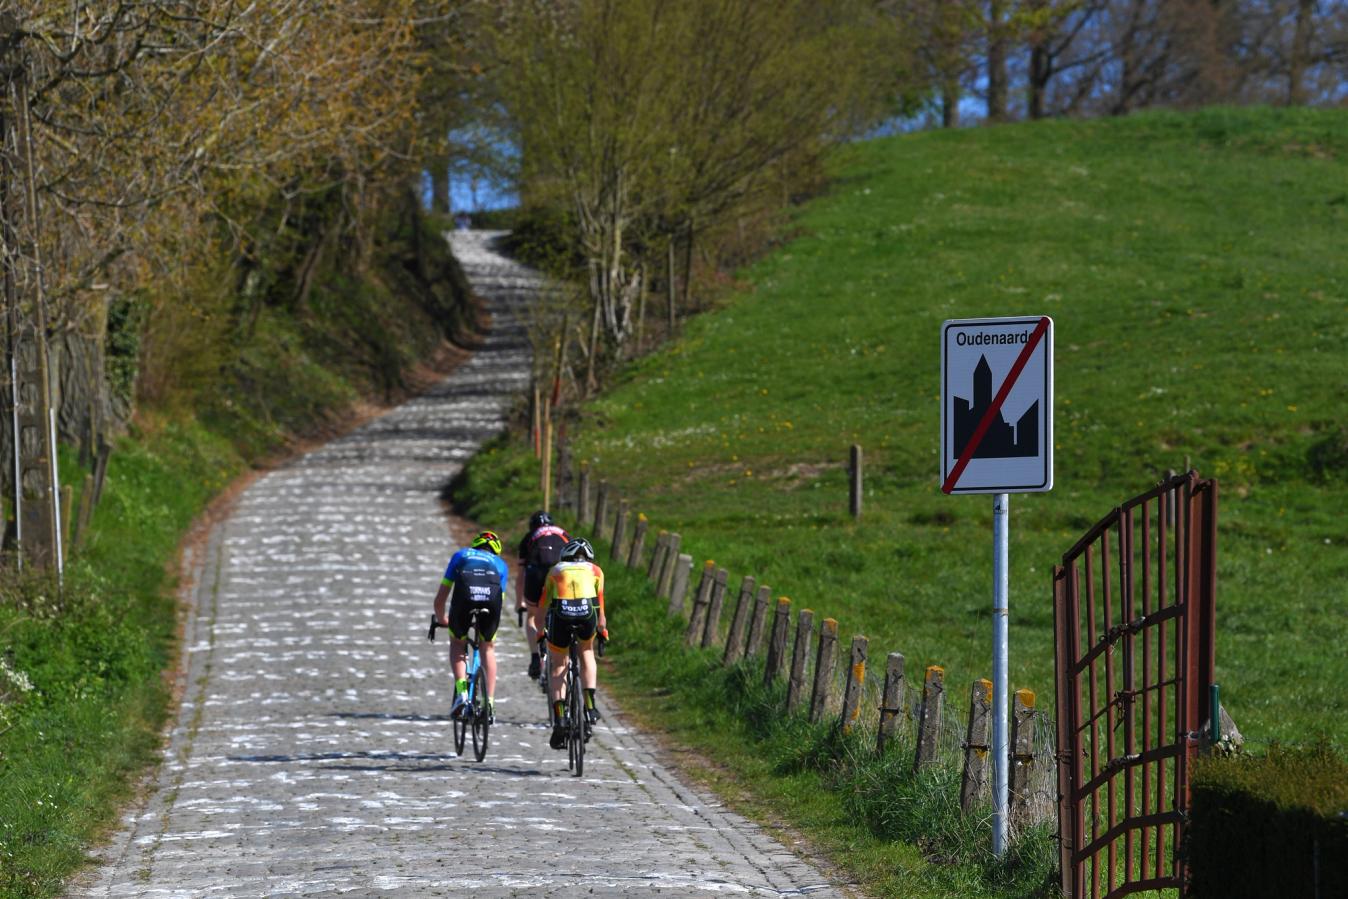 The Koppenberg is a spectacular climb